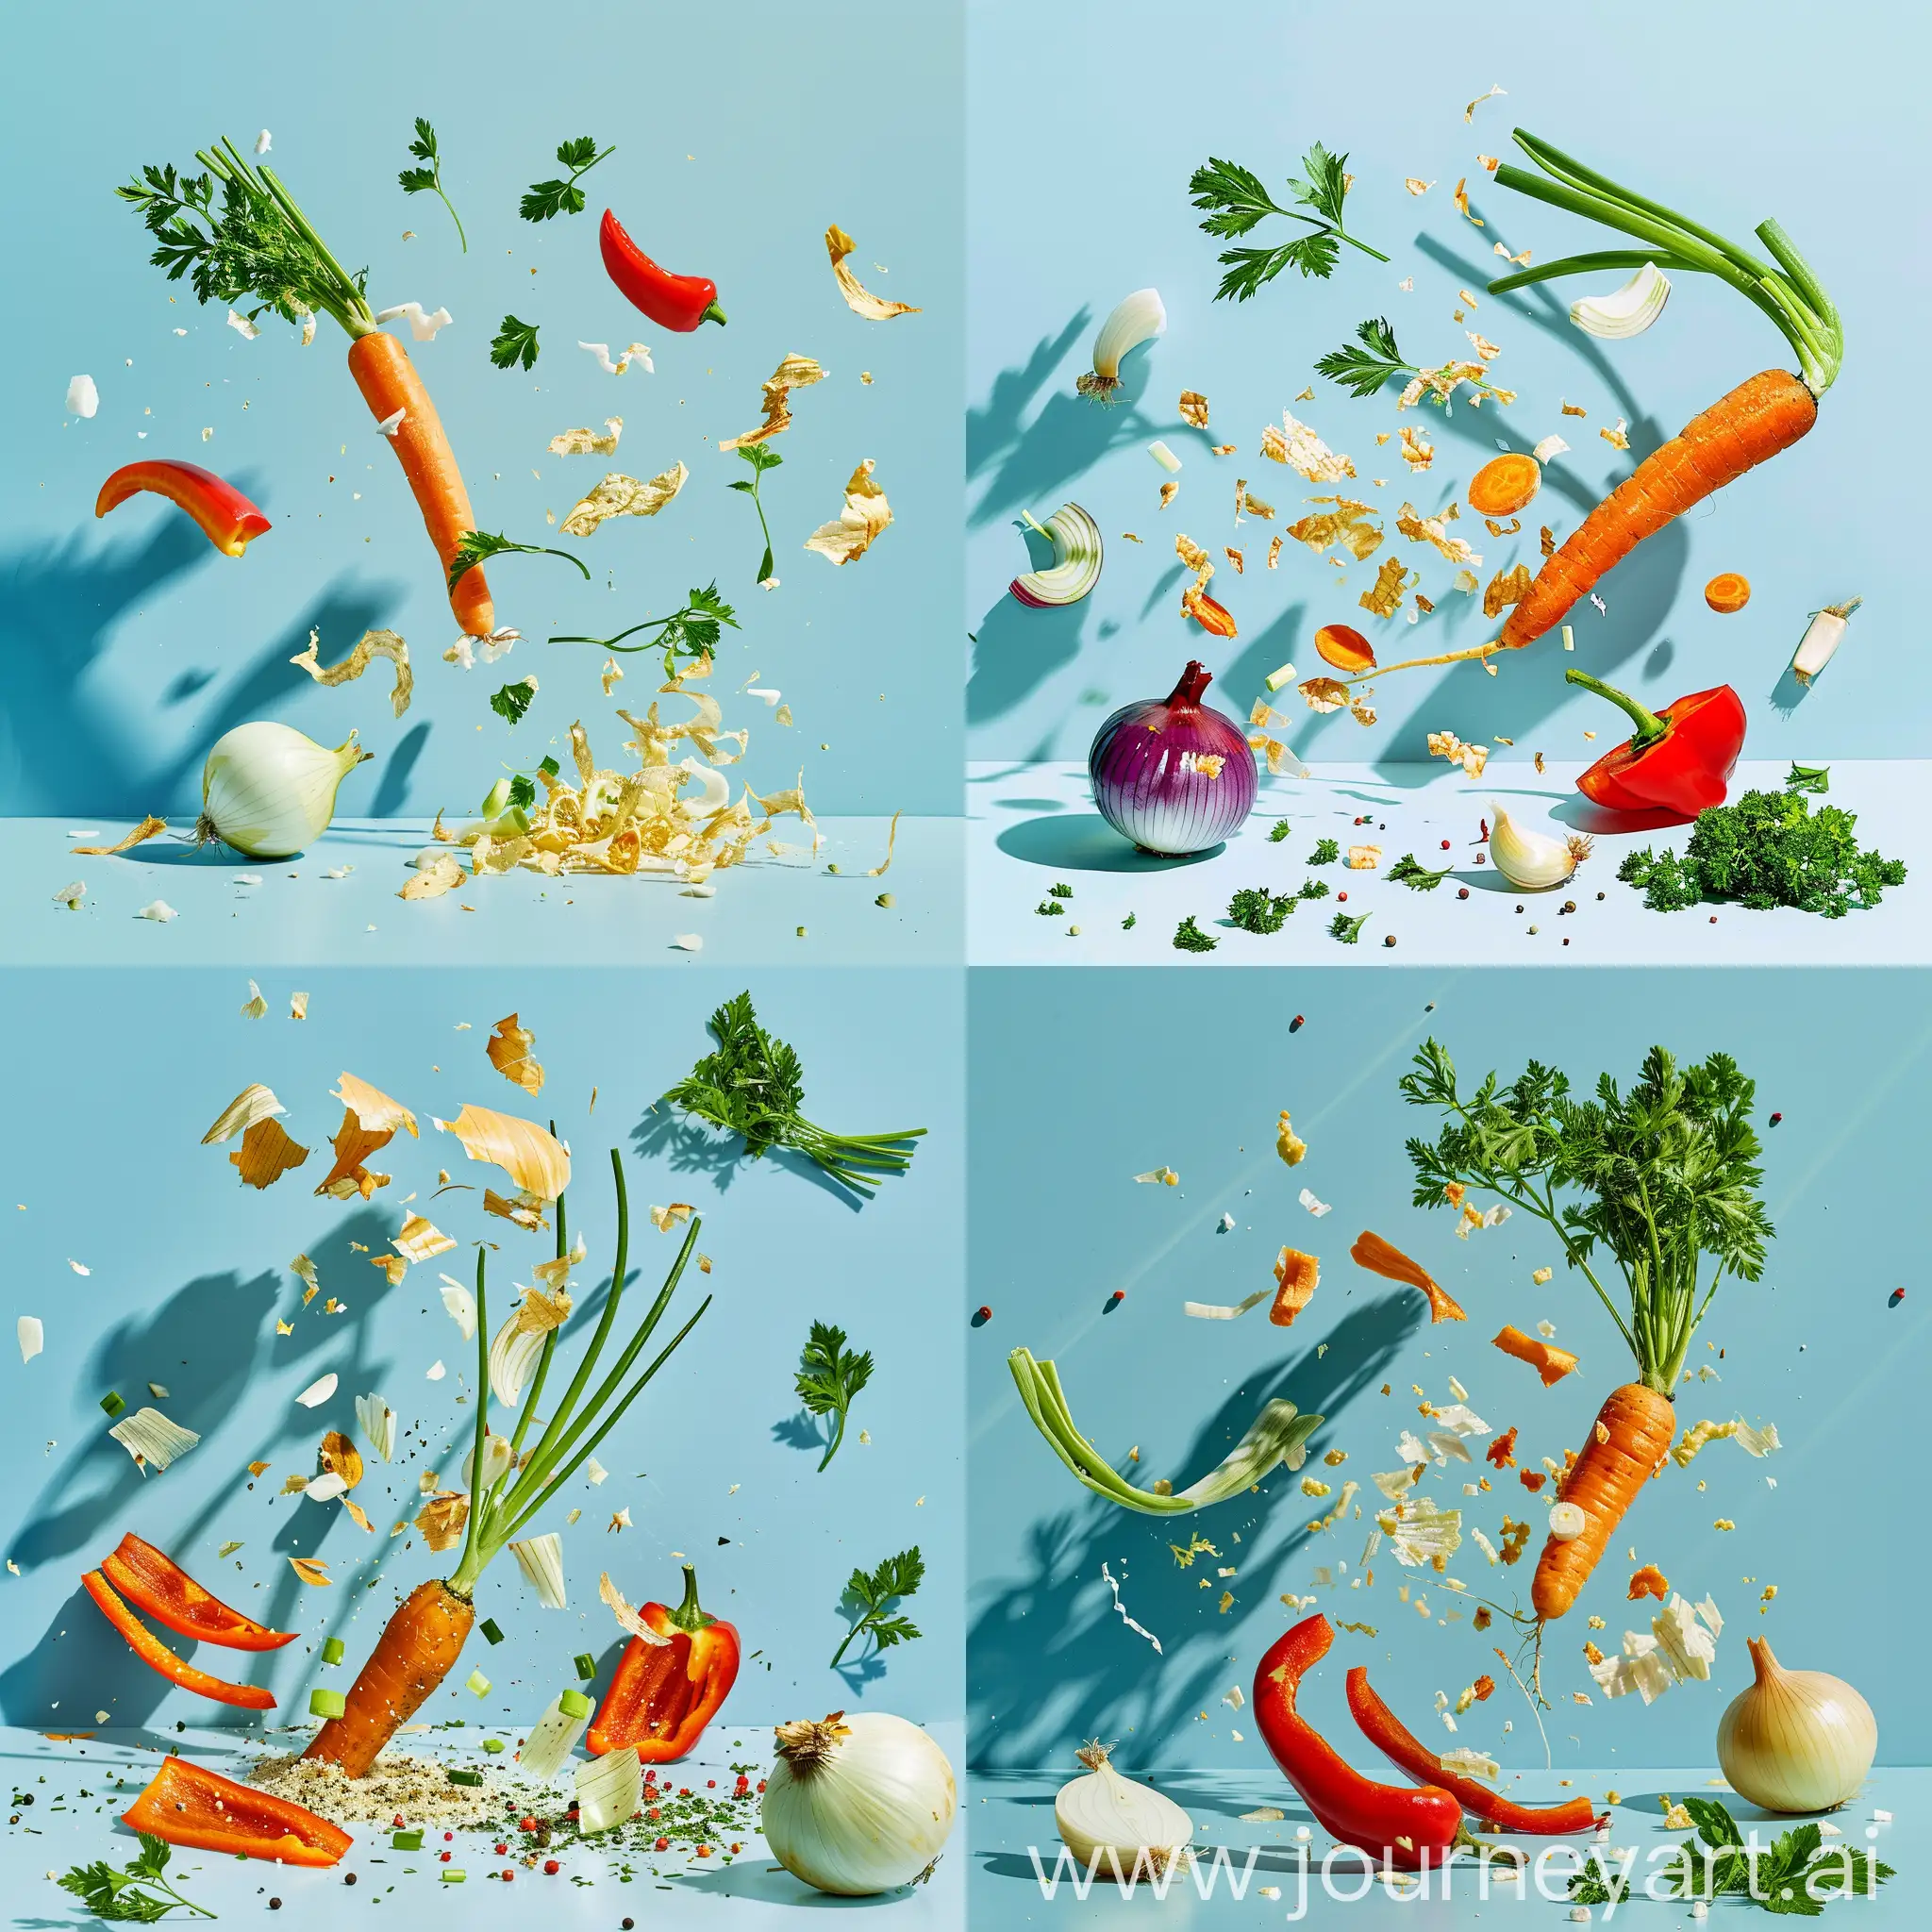 https://i.hizliresim.com/o50og56.jpg https://i.hizliresim.com/lwssi8f.png still life of delicious vegetables: (onion, a carrot, a parsley, a red pepper, a green onion) excellent product photo shot with shadows on a blue background, isolated white background with pieces of vegetables exploding and disintegrating, scattering into the air, becoming increasingly dried yellowish as they shrink in size --iw 2